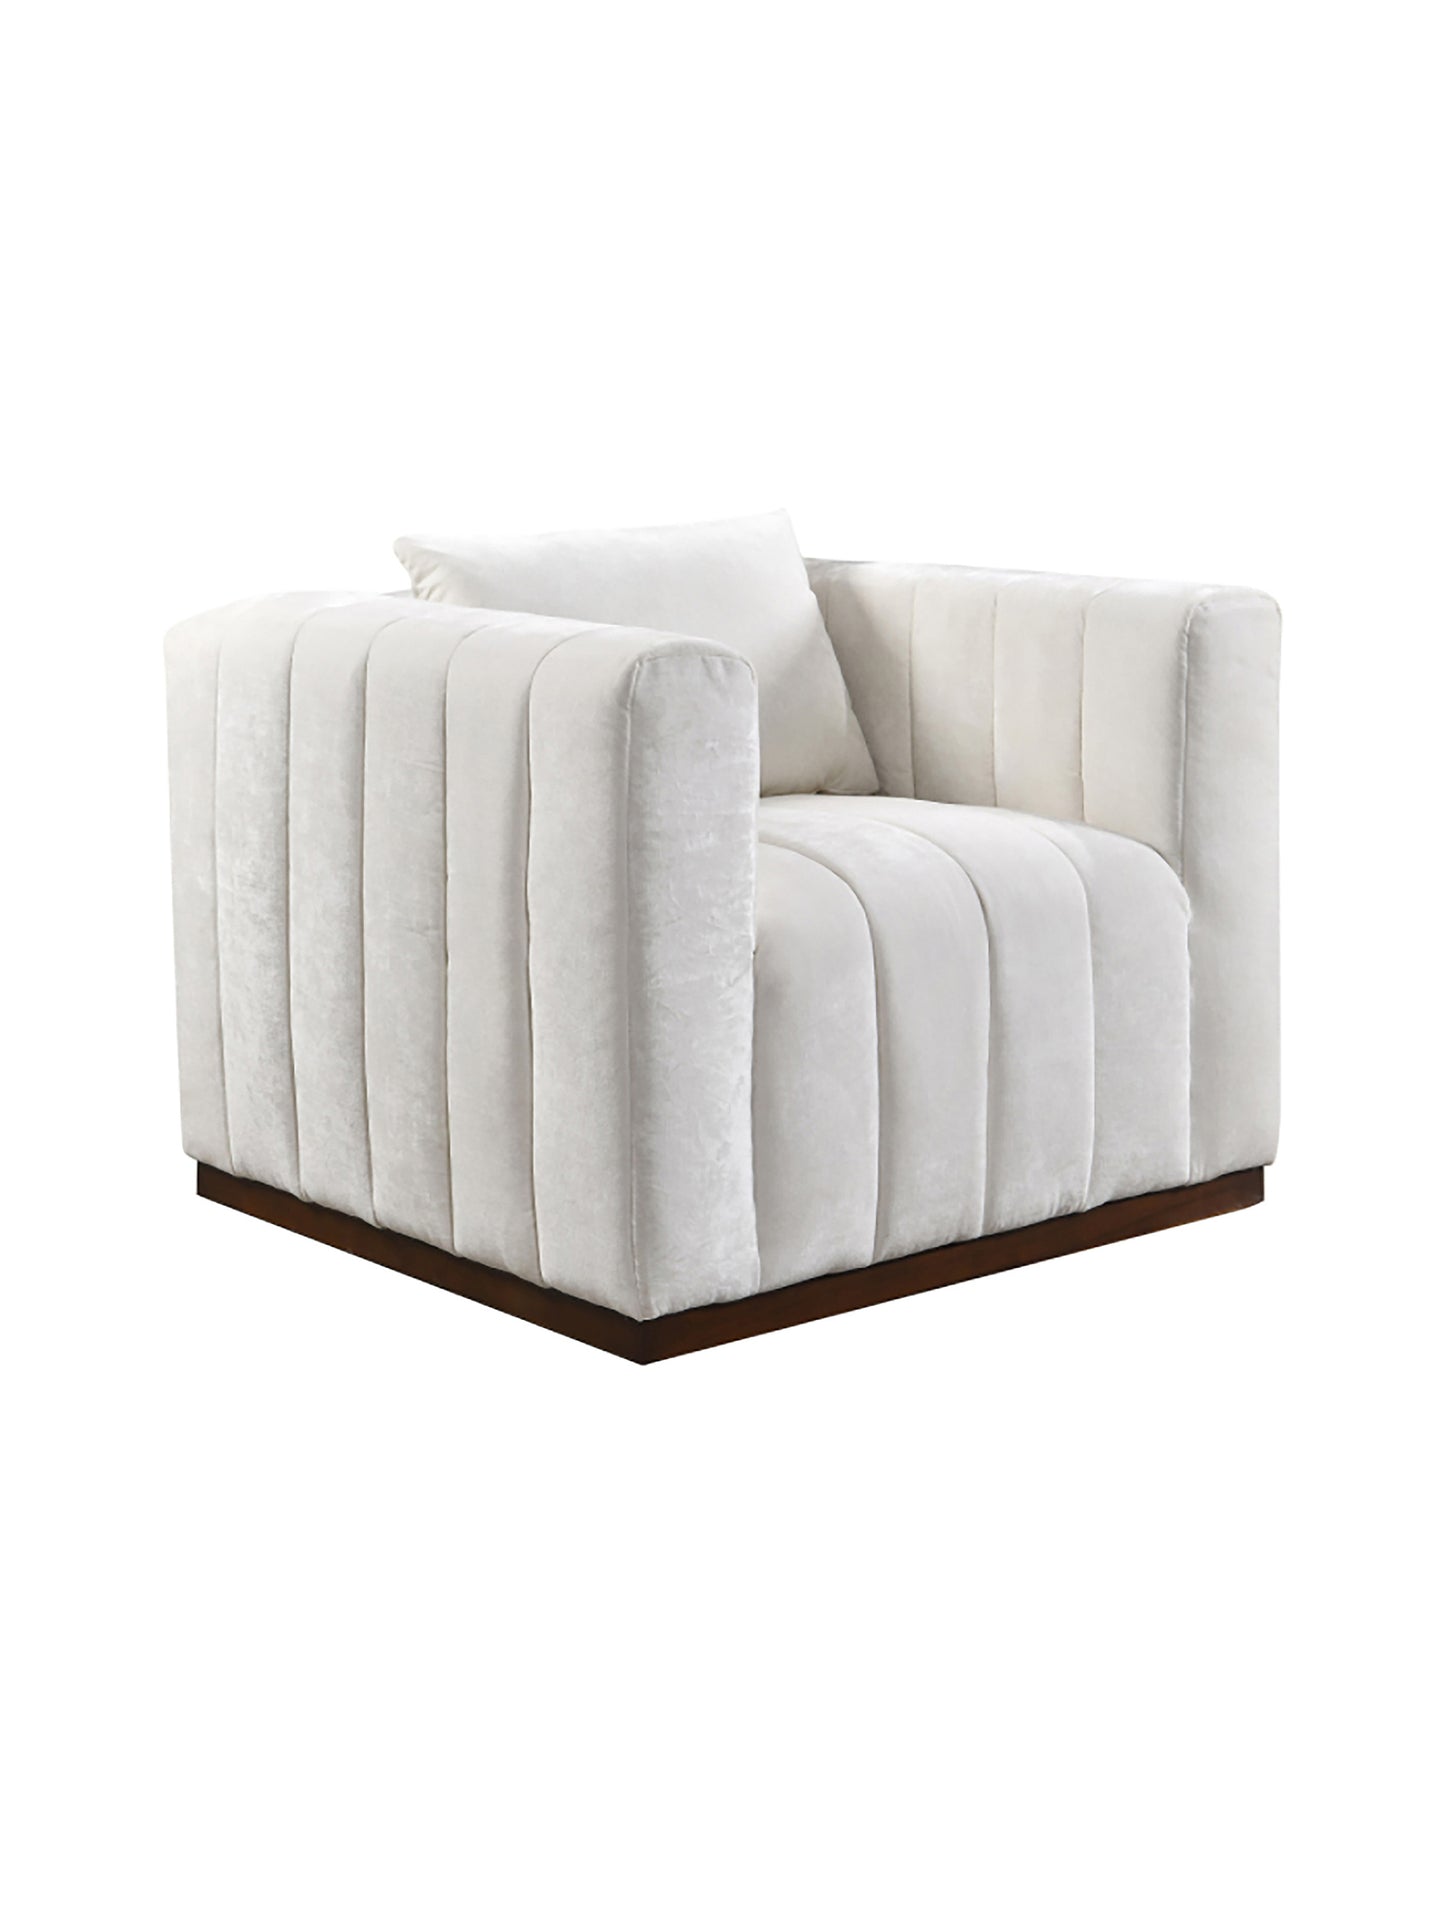 Eclectic Home Storme Ivory Sofa Chair